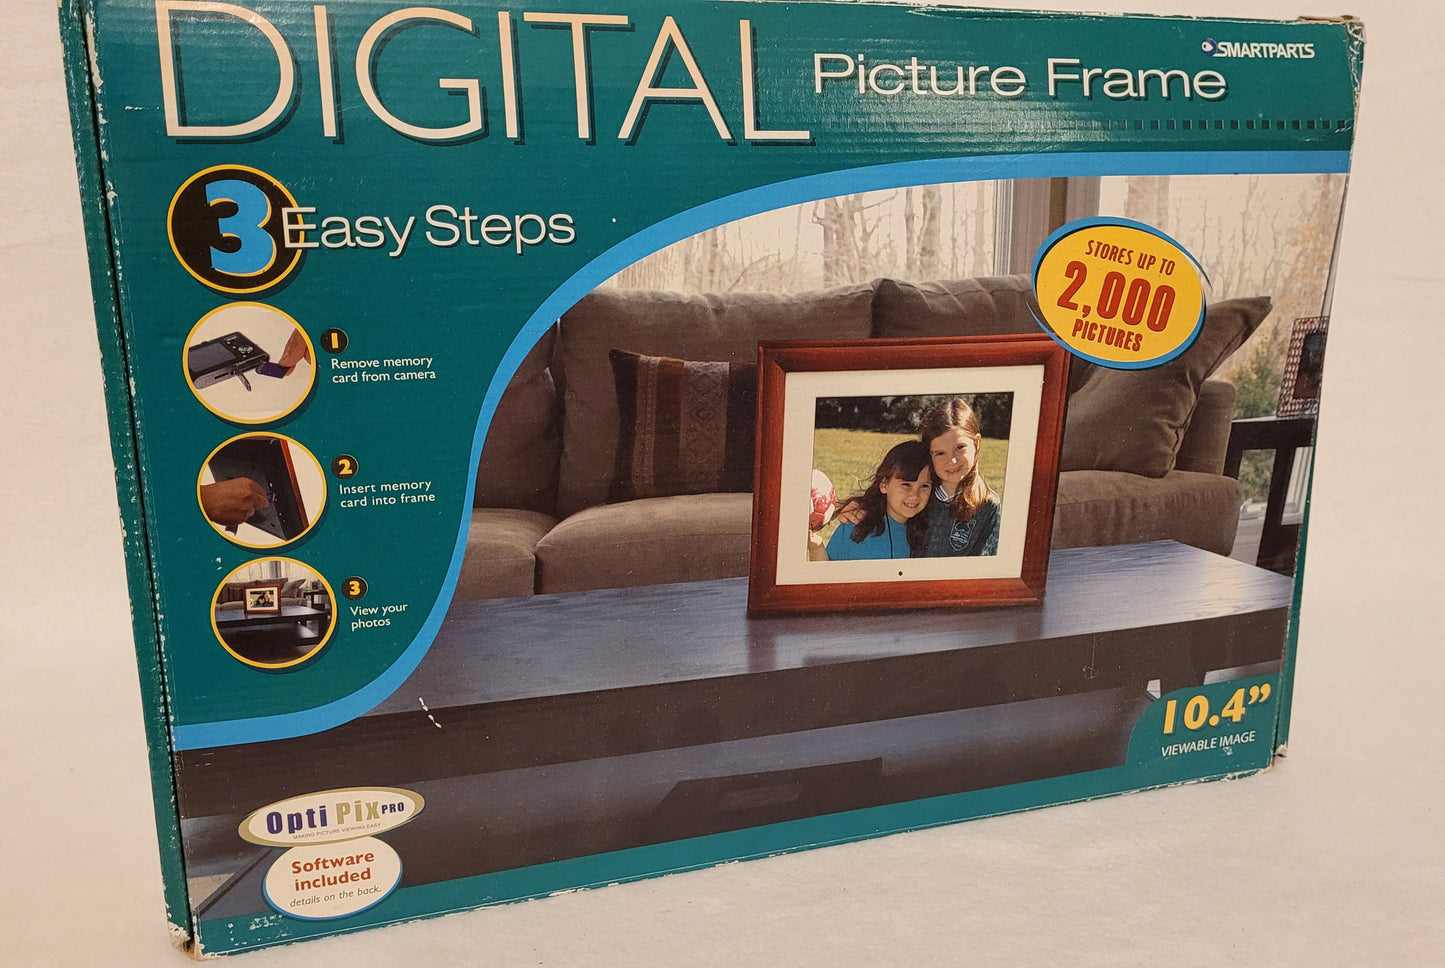 NIB ~ Digital 10.4" Picture Frame (Stores 2000 Pictures)